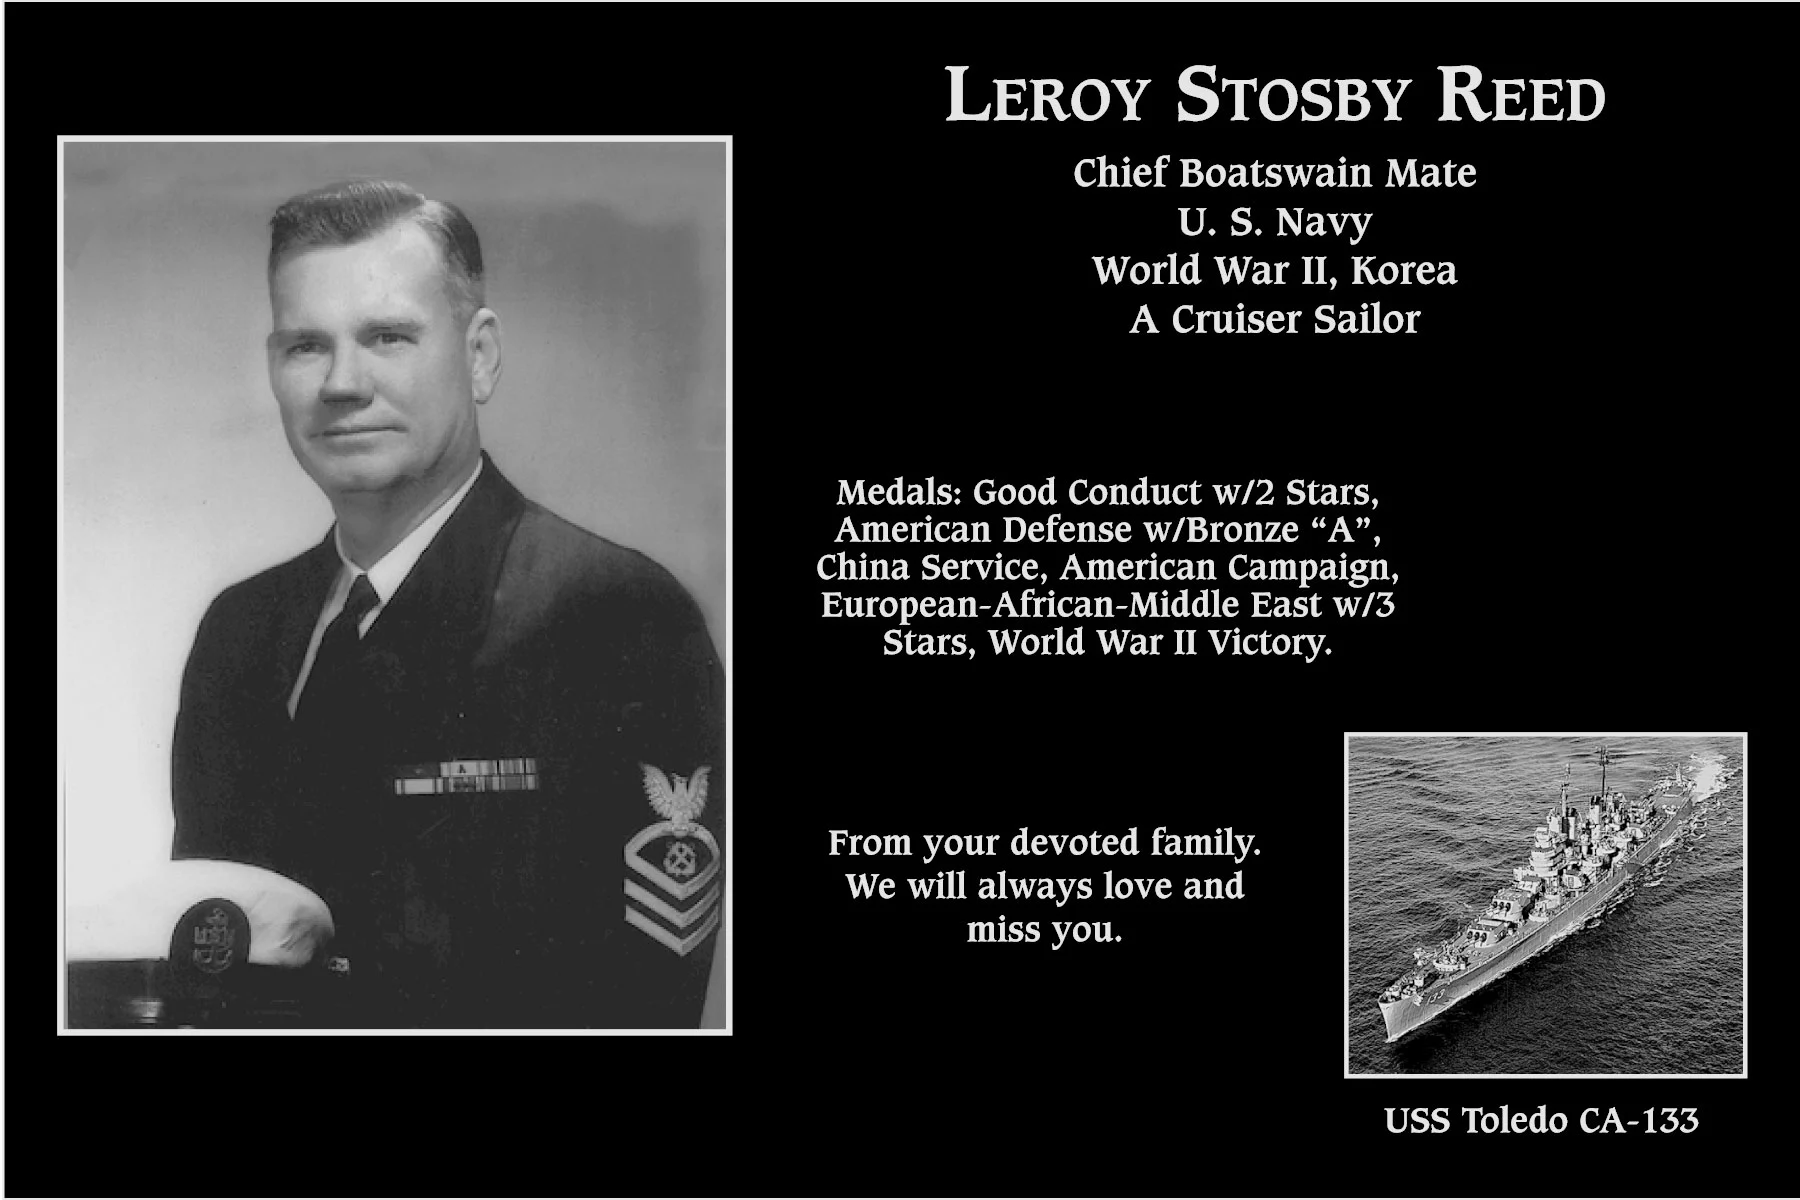 Leroy Stosby Reed